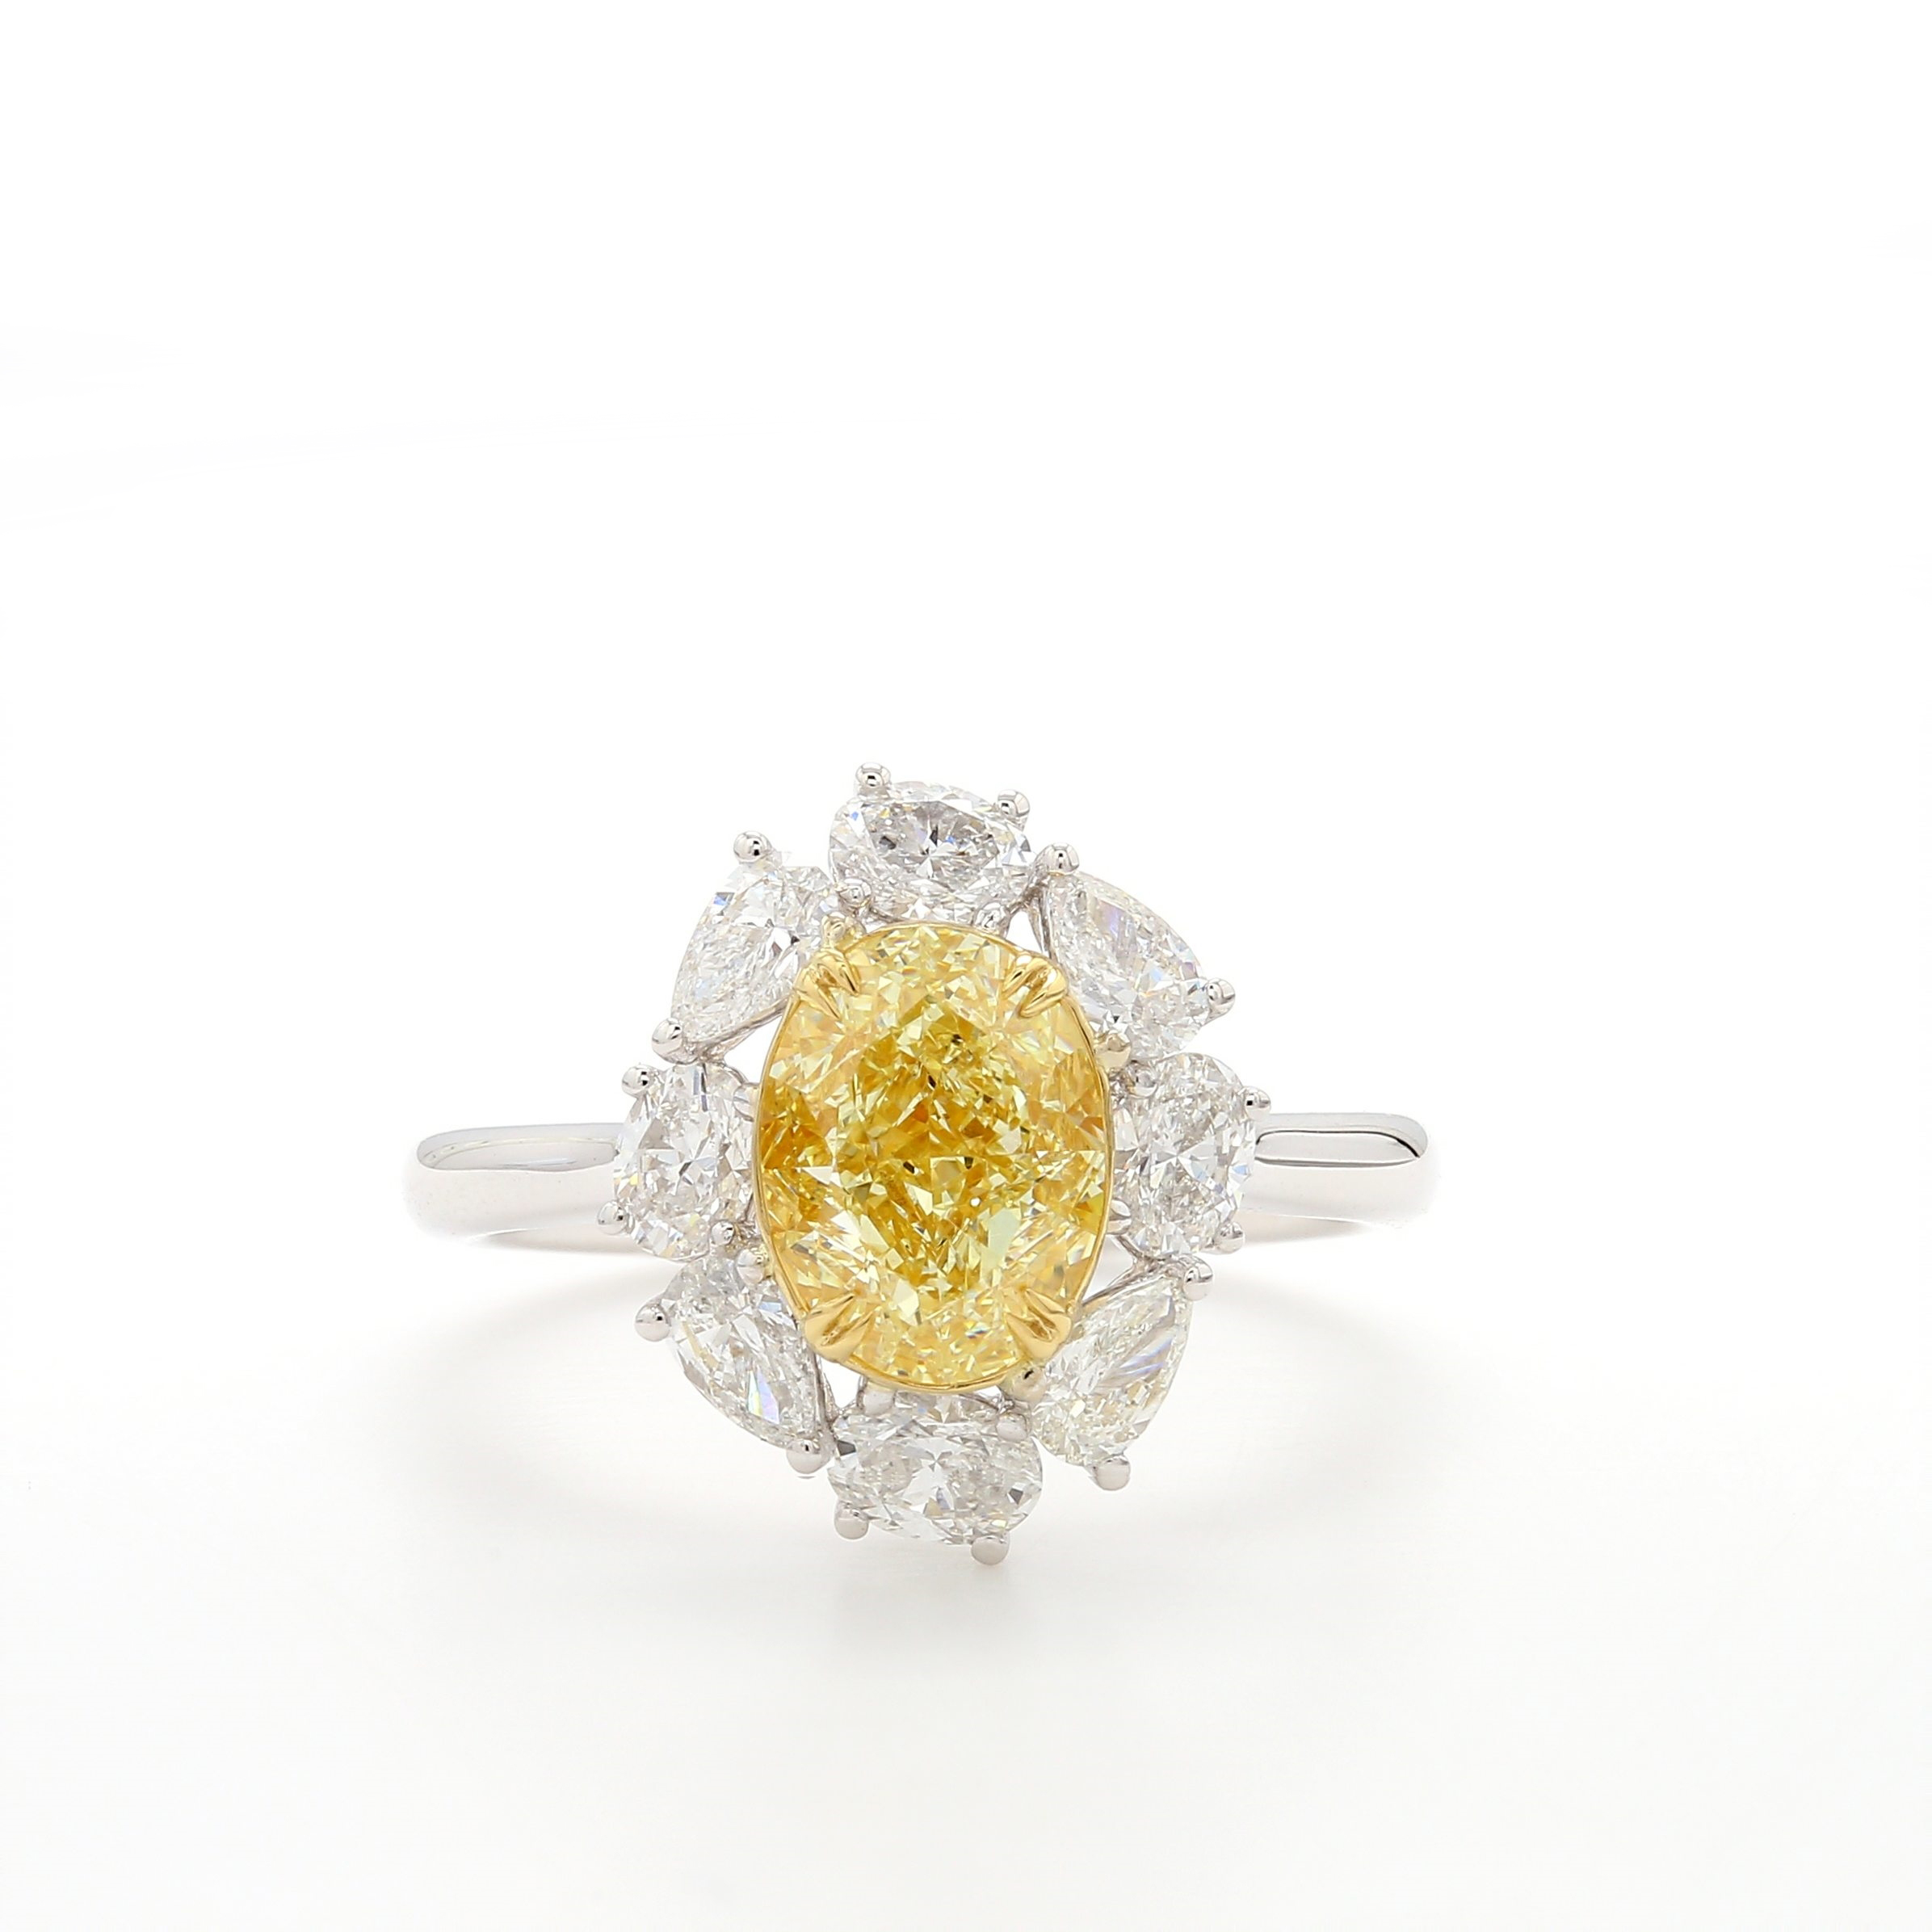 How To Choose Your Perfect Piece From The Wide Range Of Sparkling Gia Certified Yellow Diamonds